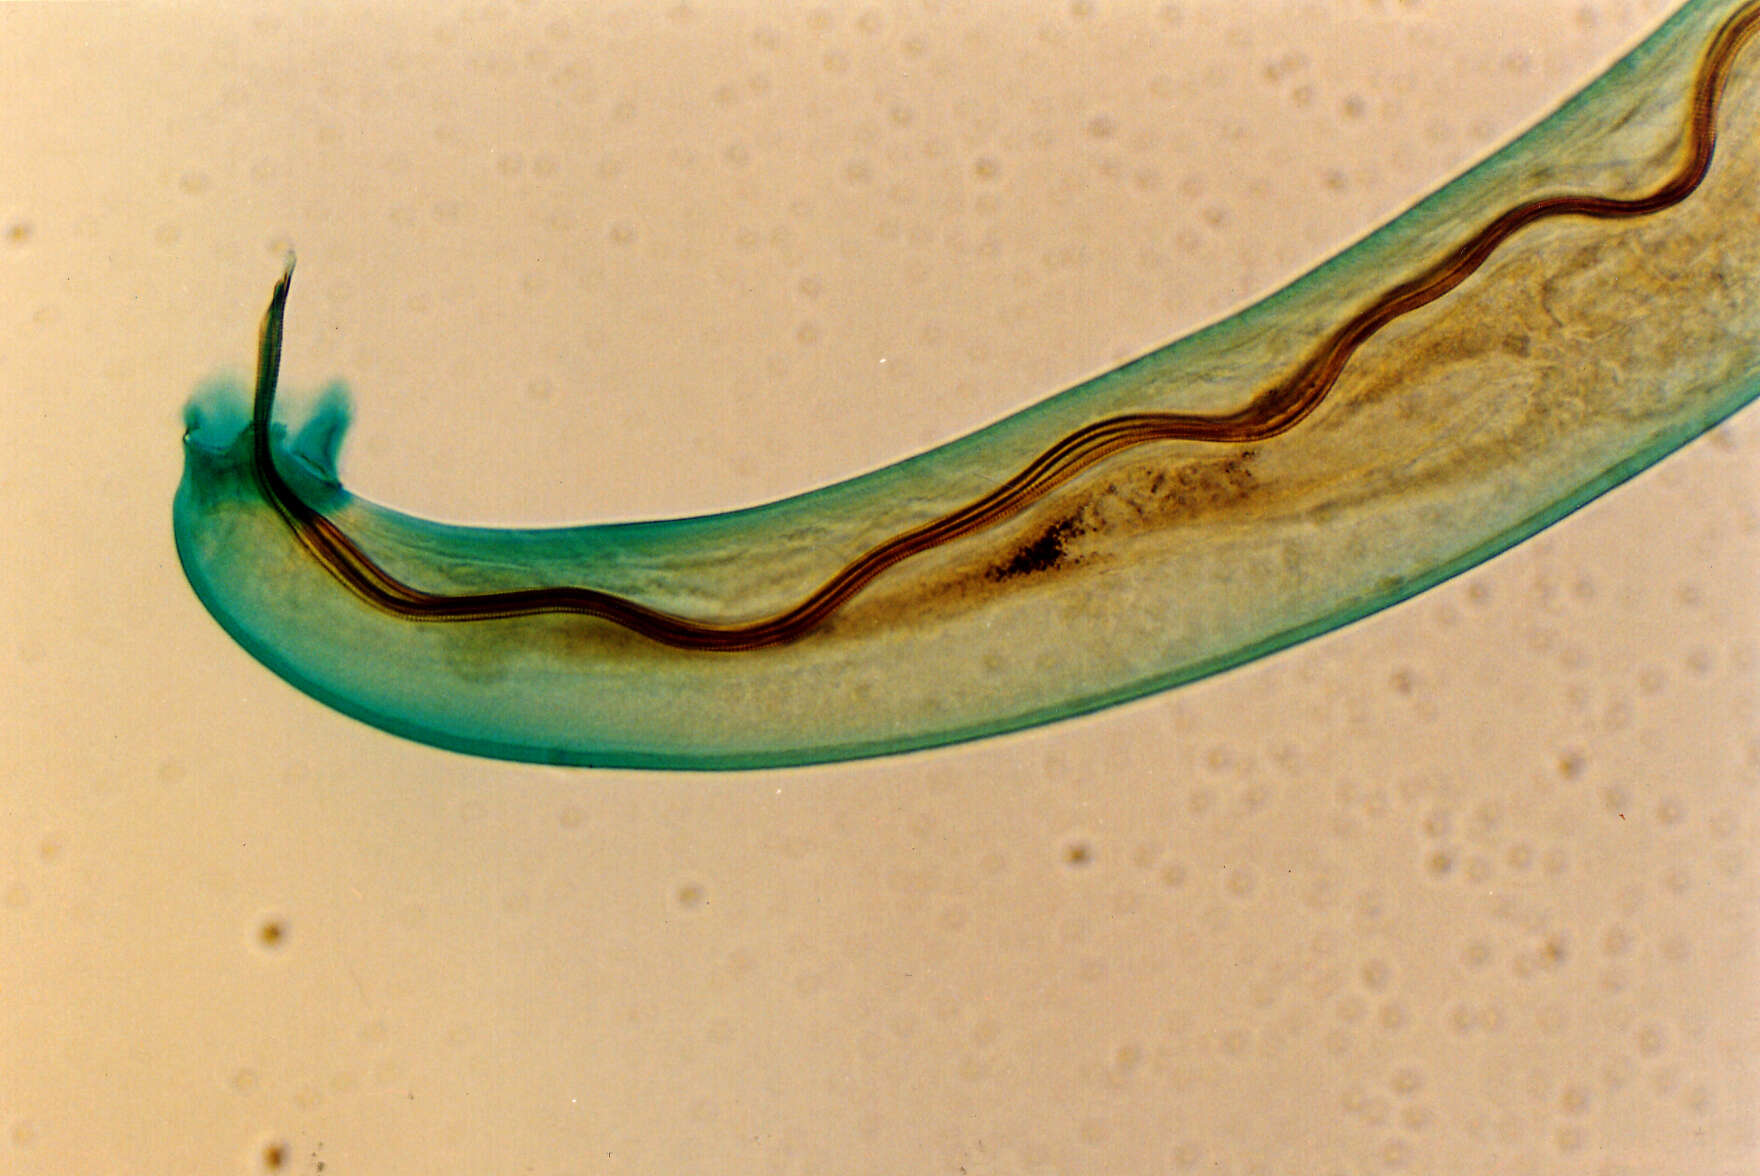 Image of Rat lungworm